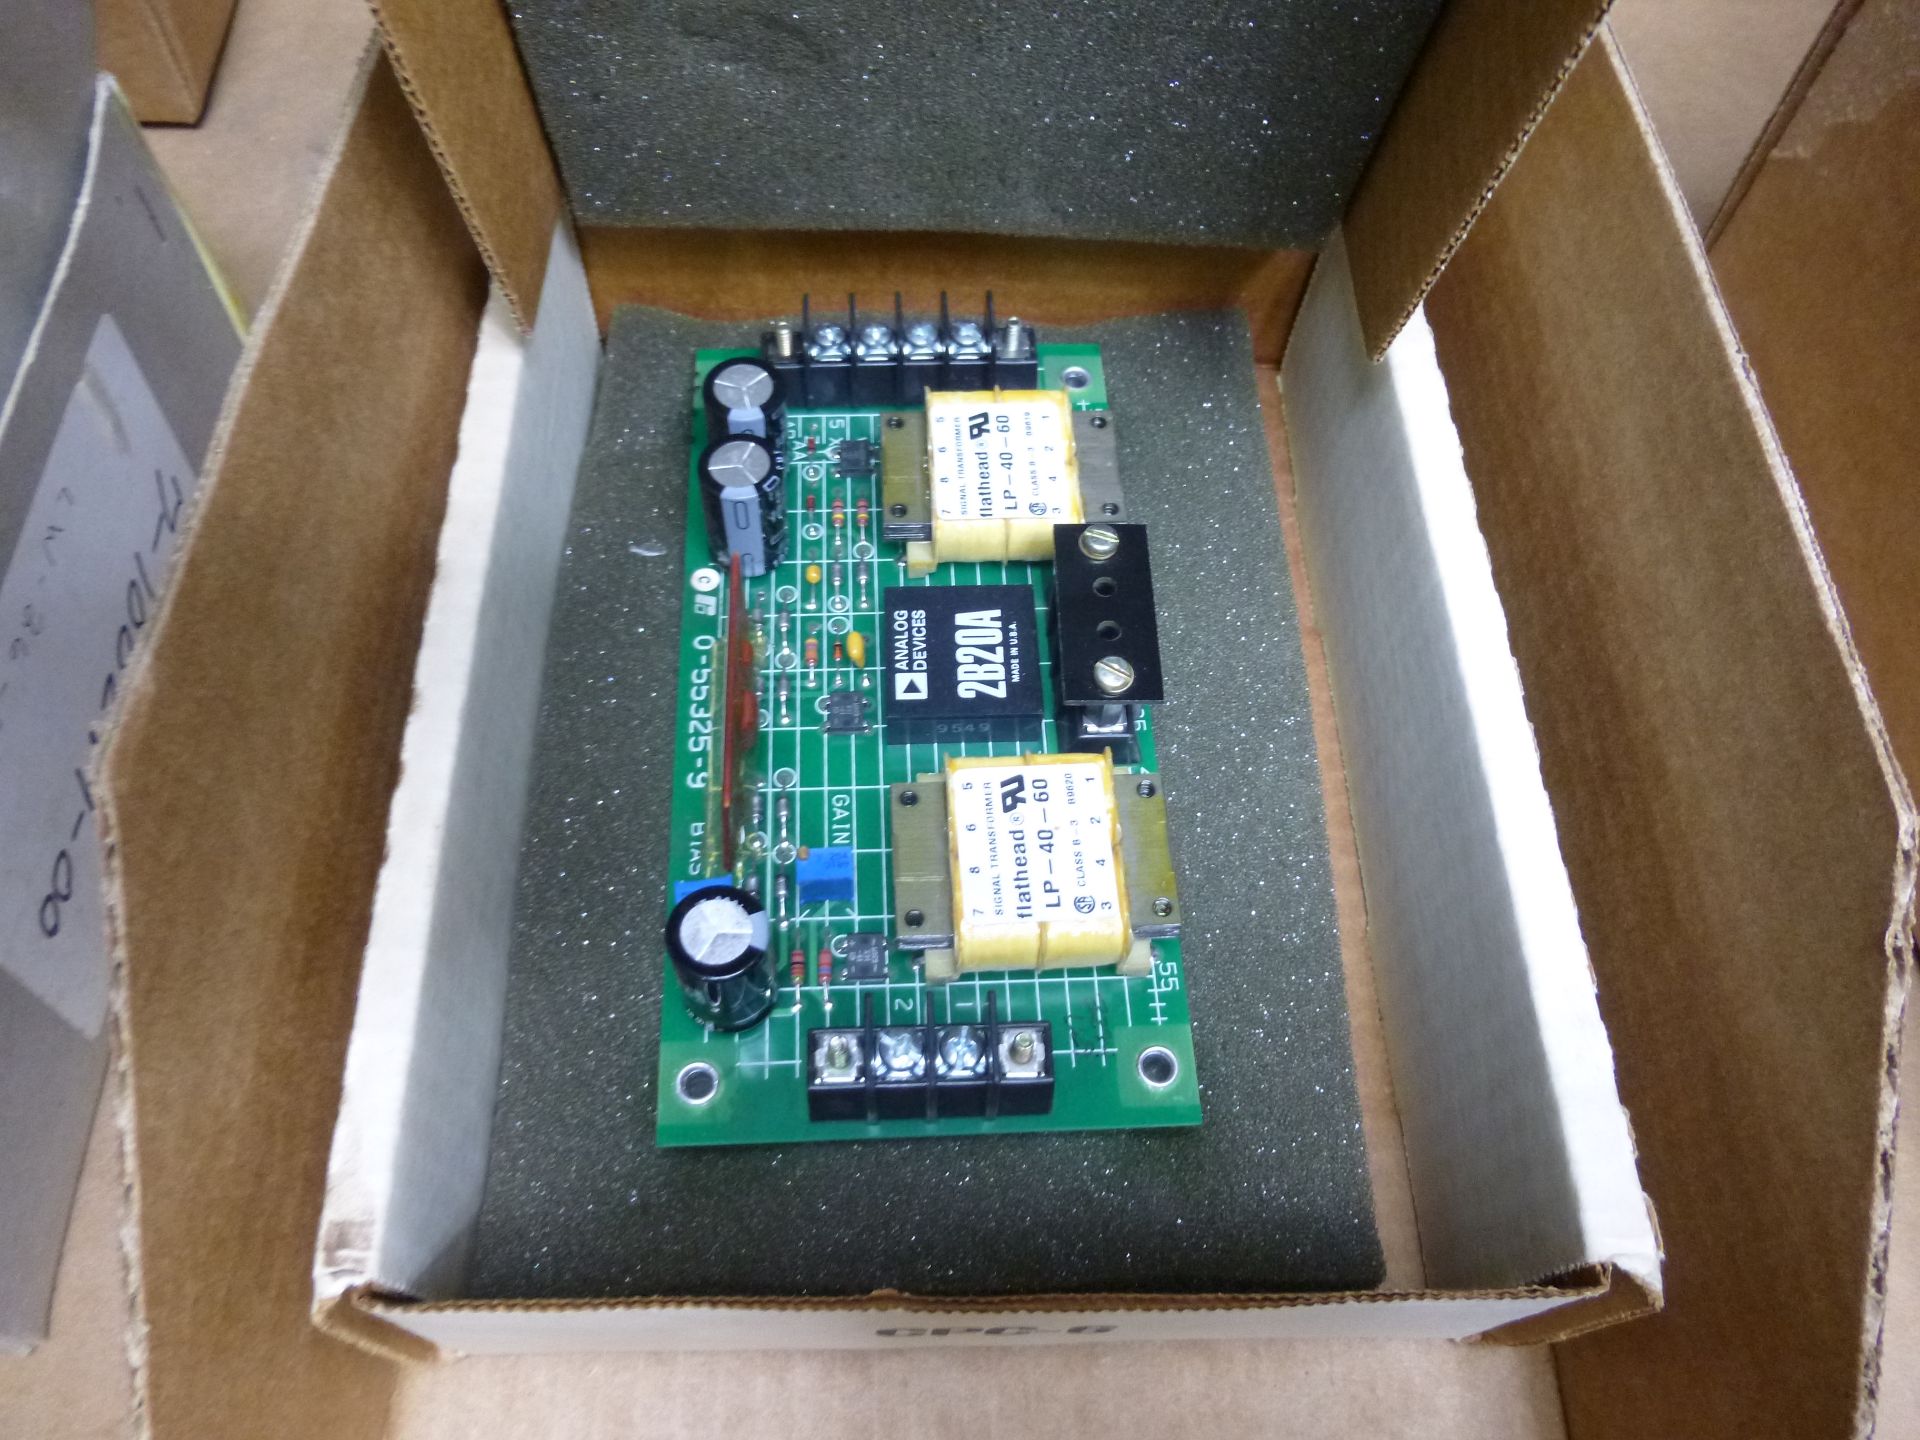 Reliance Electric 0-55326-9 Voltage Isolation PC Board (new in box) Shipping can be prepared for - Image 2 of 2